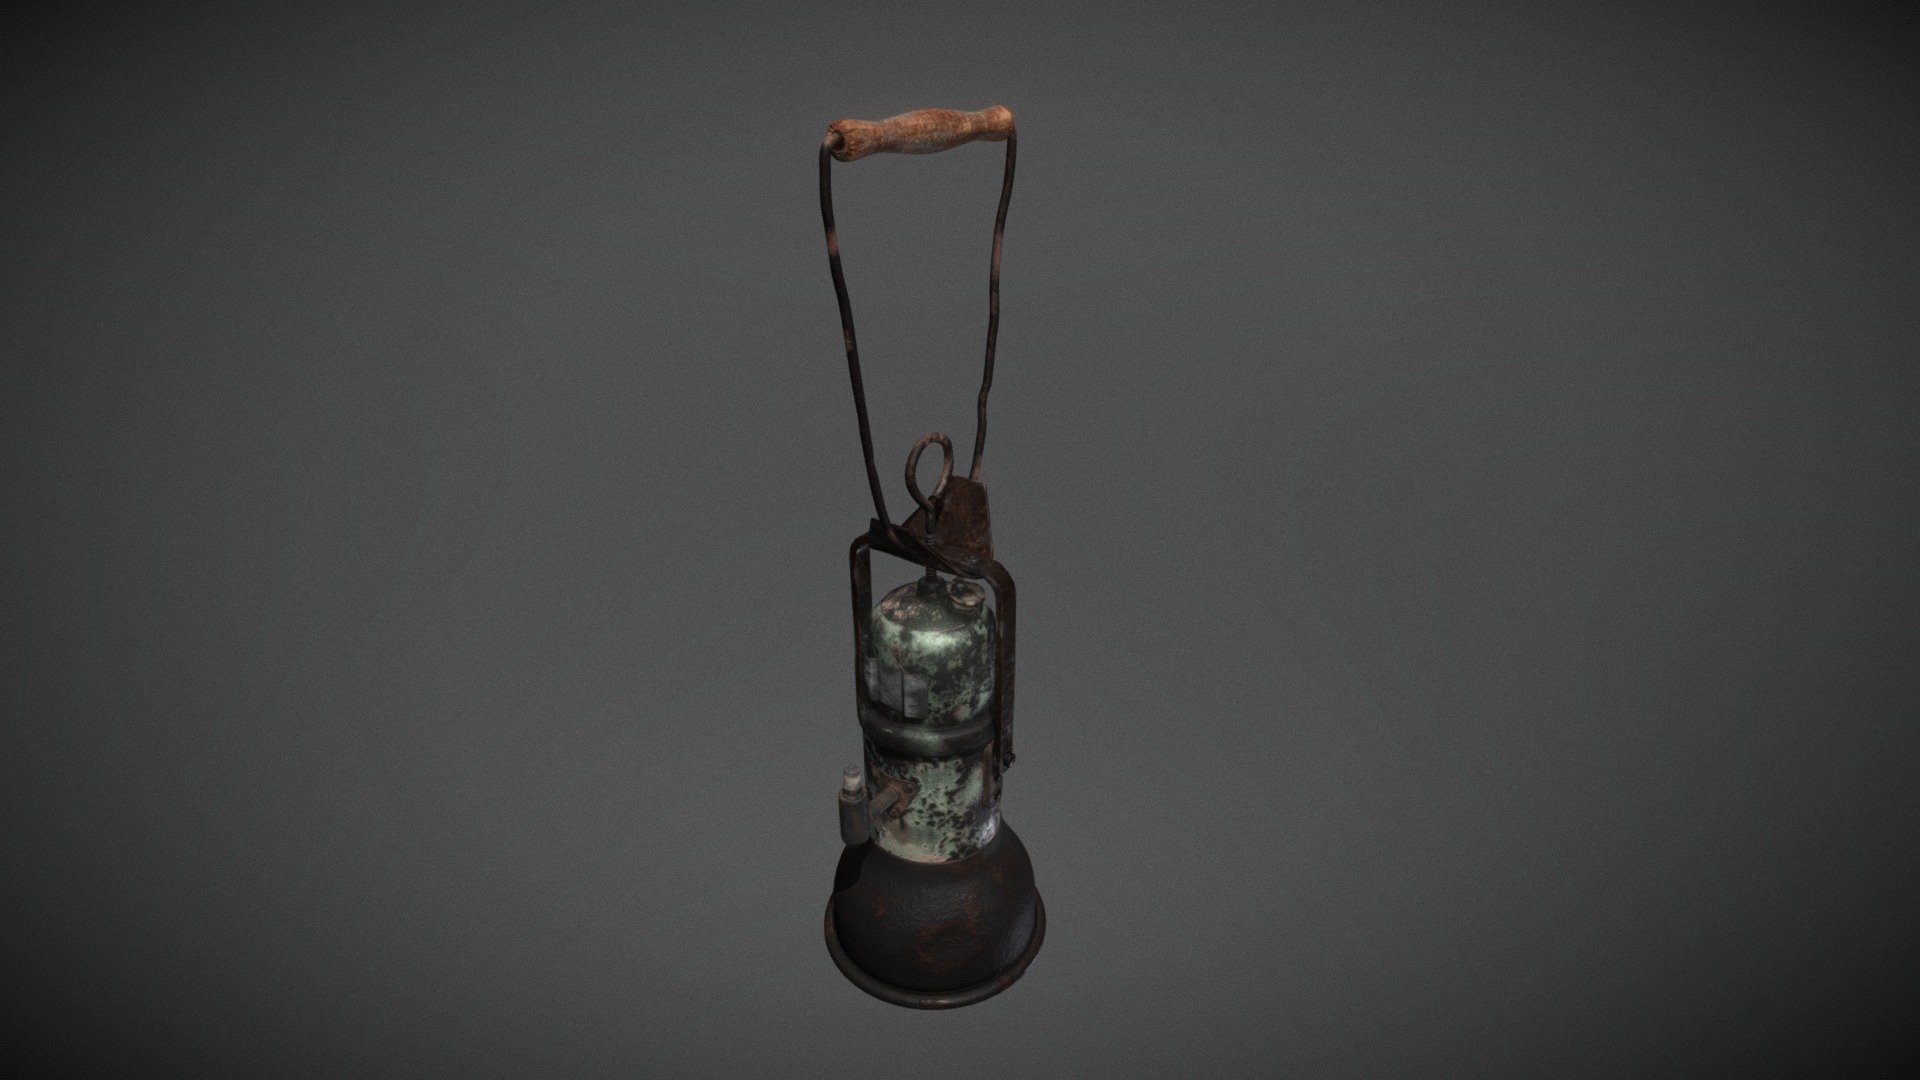 It's an old karbid lamp from the early last century.  The cavers (speleologists) used this tipes of lamps. One of my colleague is a caver and archeologist. She collect antique stuff especially caver equipments.  I could take some reference image.  So I modelld it after a real lamp 3d model